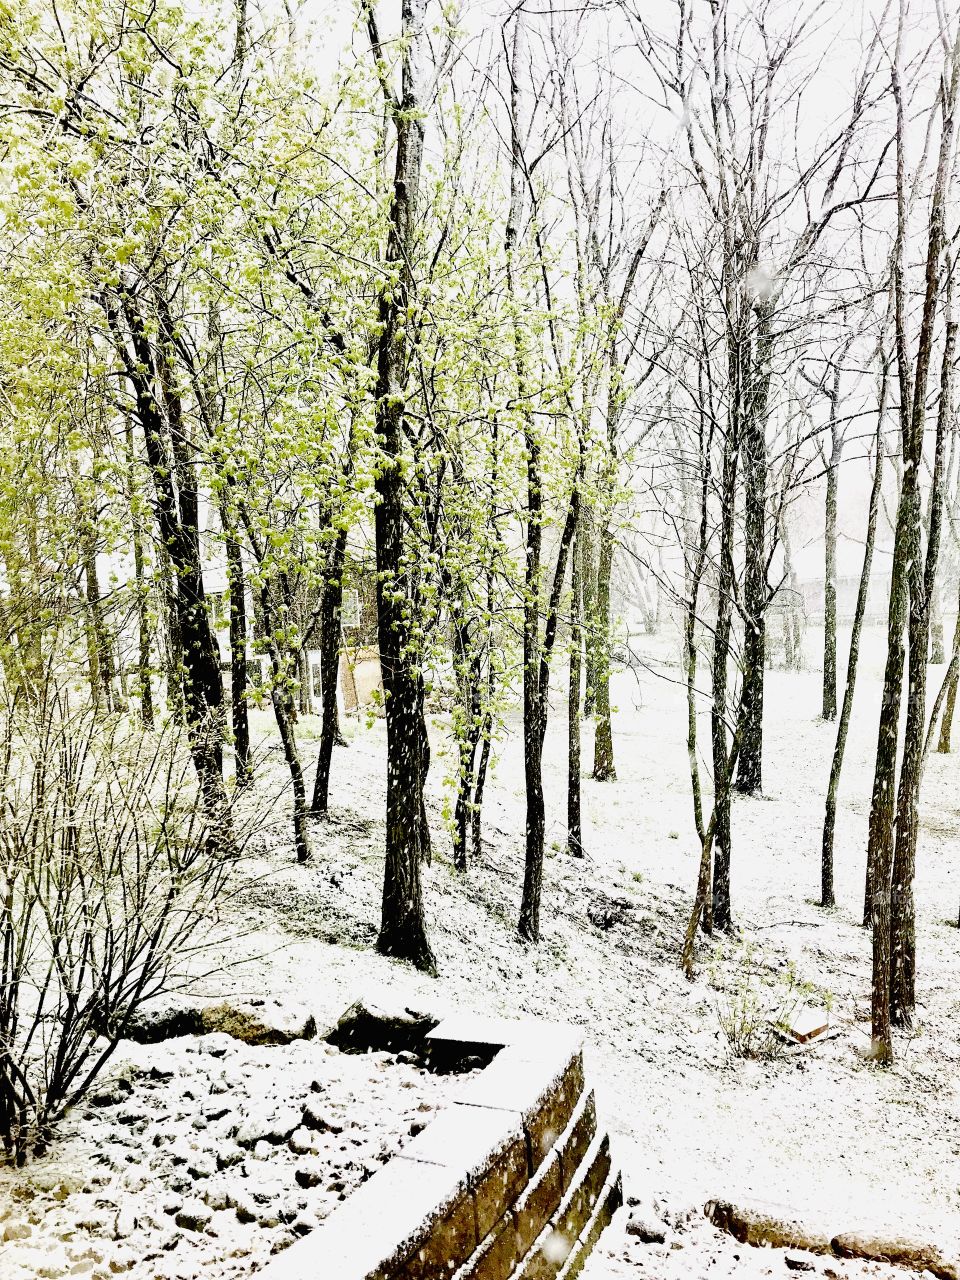 Gorgeous forest of trees with leaves blooming and freshly fallen during snowfall! 